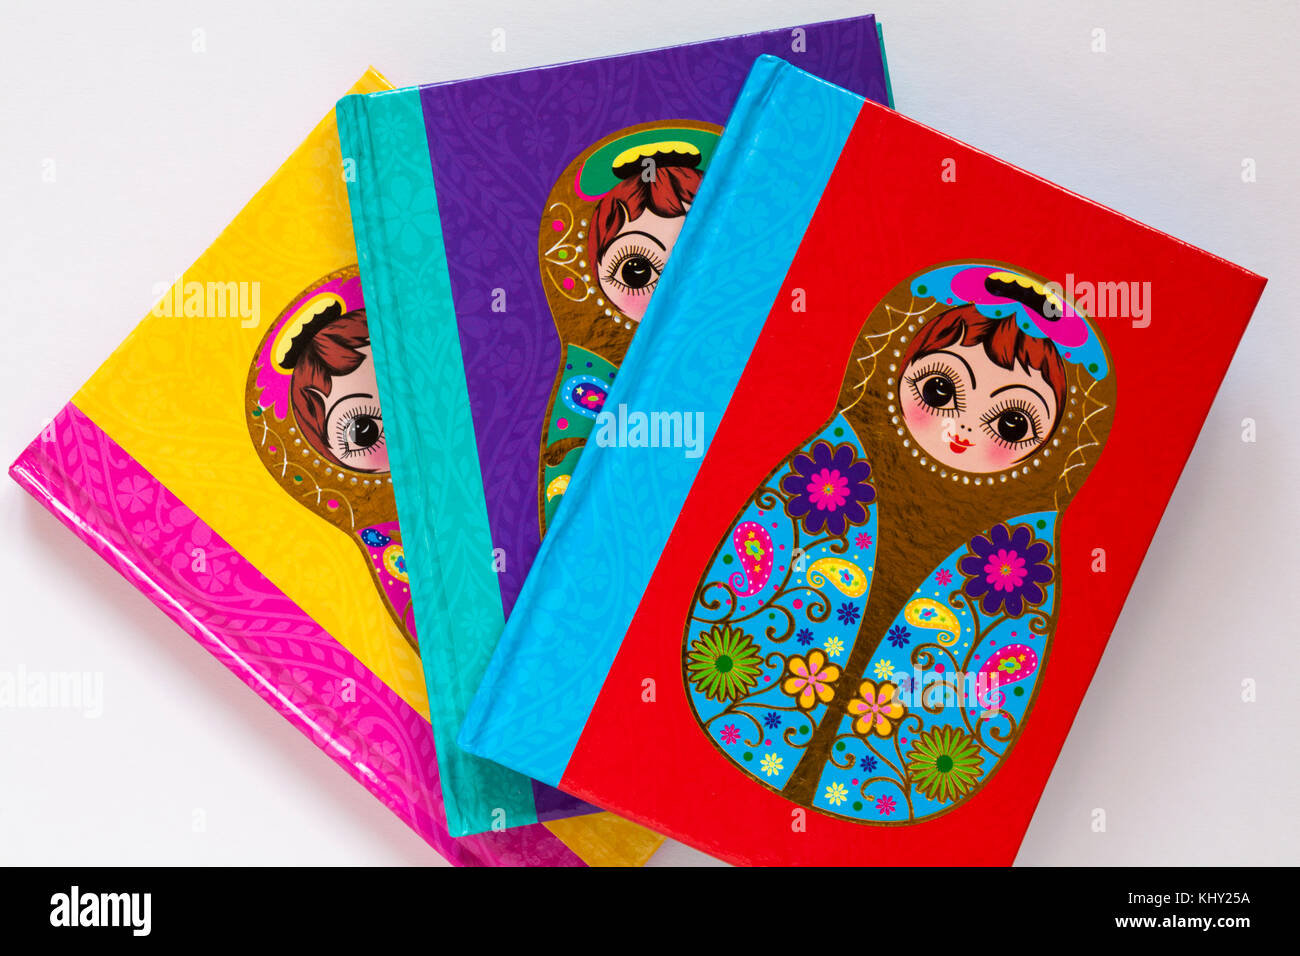 Three different coloured note books with matryoshka doll on cover set on white background Stock Photo